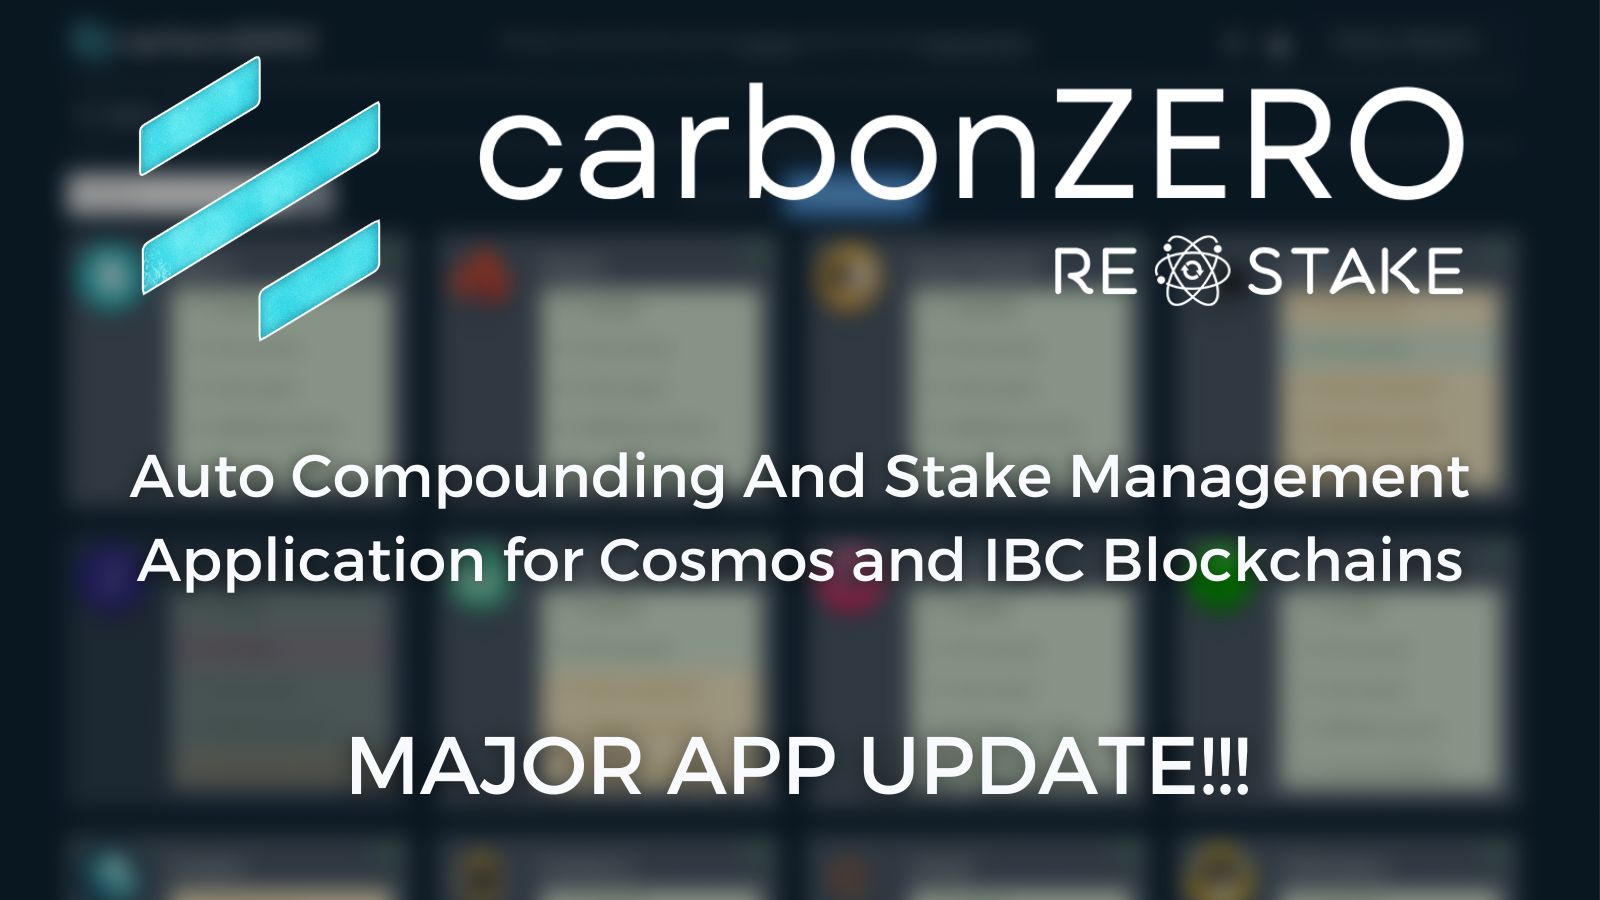 @carbonzerozone/major-updates-to-our-restake-app-auto-compounding-staking-and-governance-for-cosmos-chains